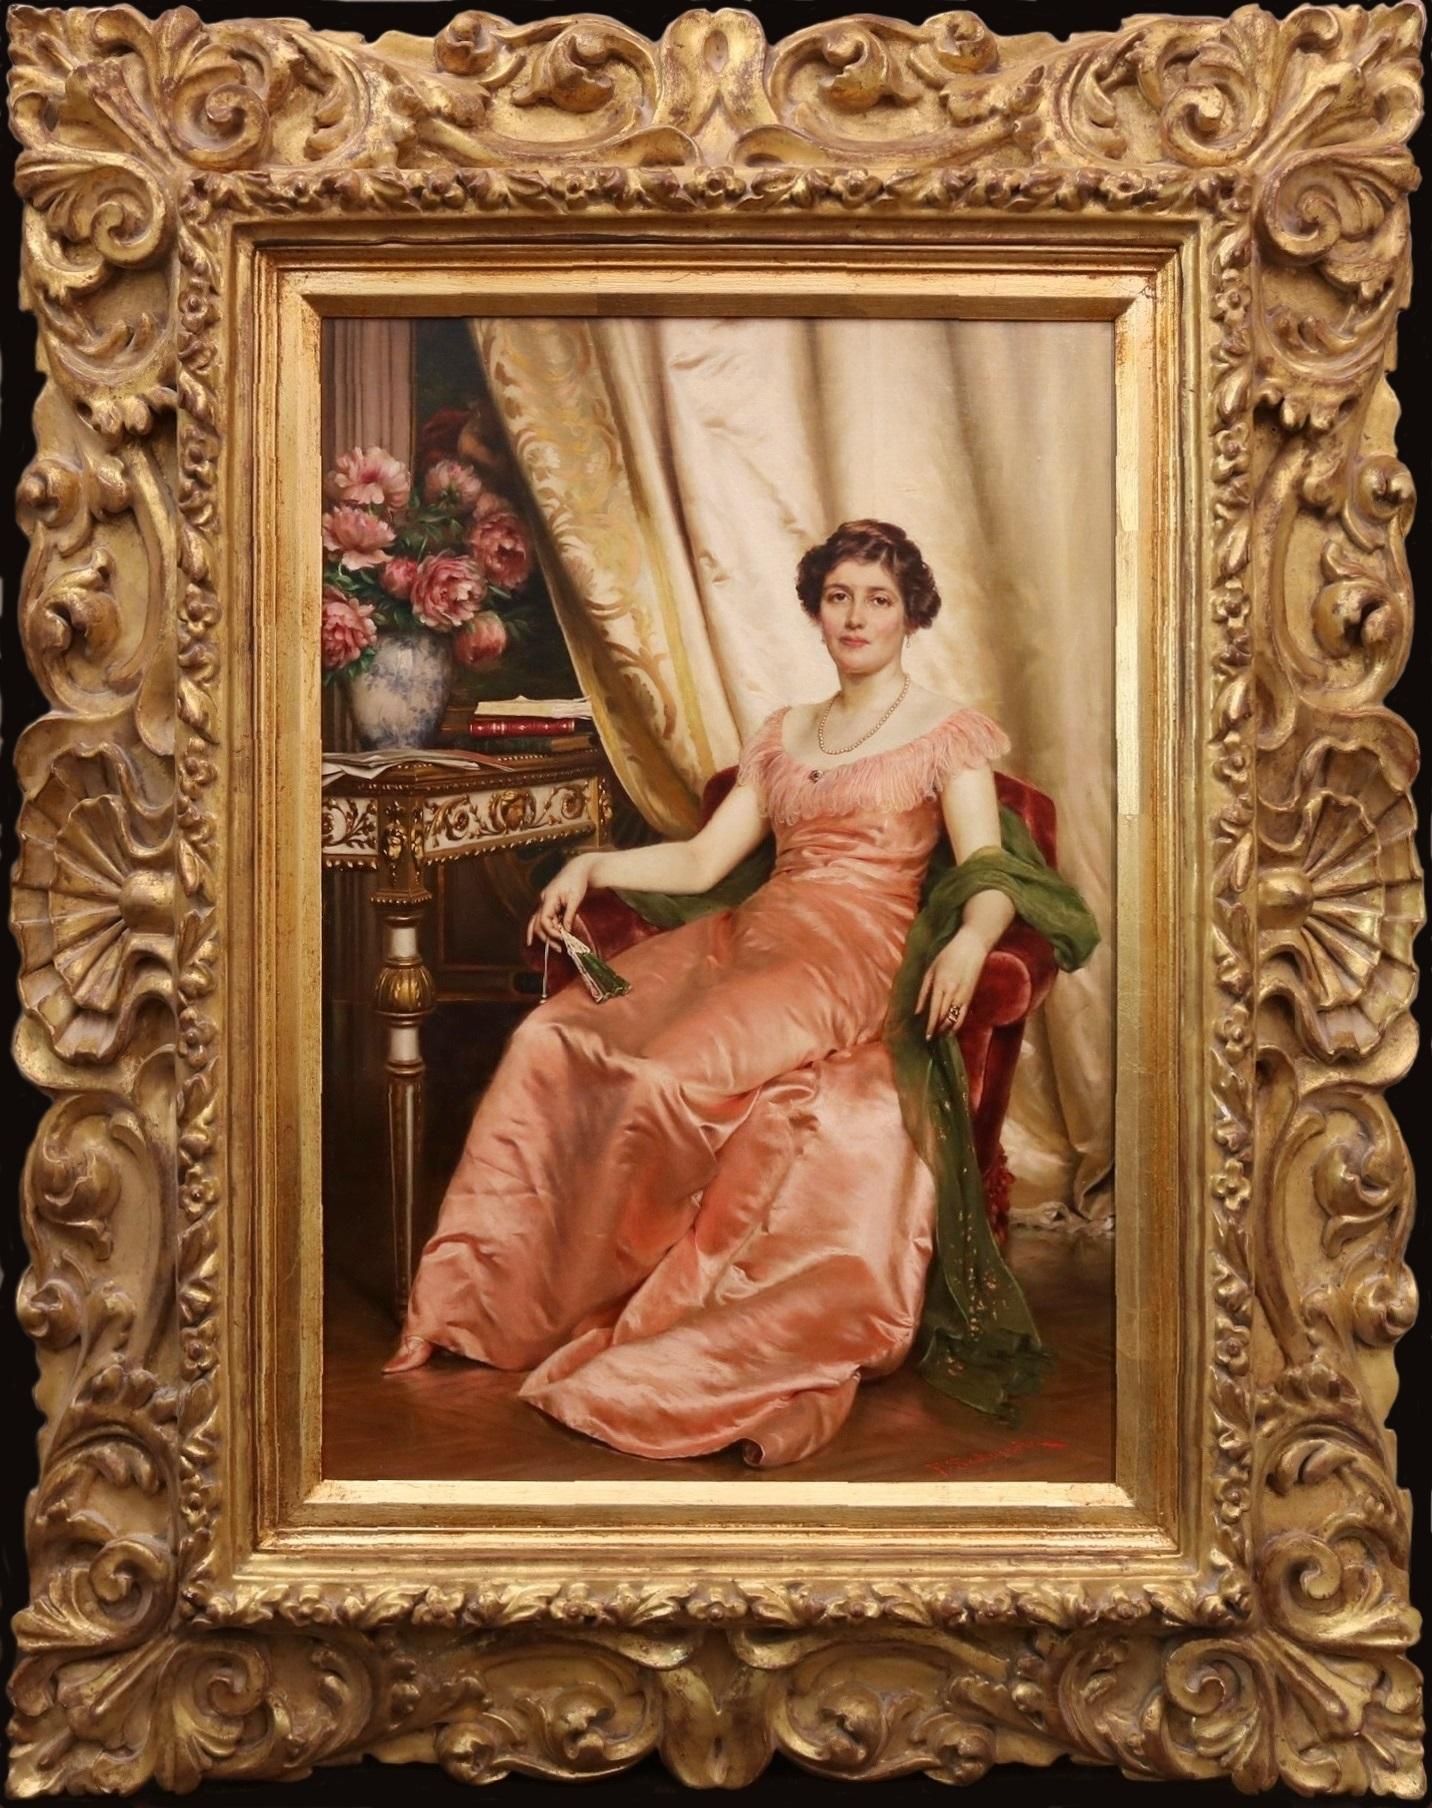 Regina dei Fiori - 19th Century Oil Painting Society Portrait of Italian Beauty - Brown Figurative Painting by Frédéric Soulacroix